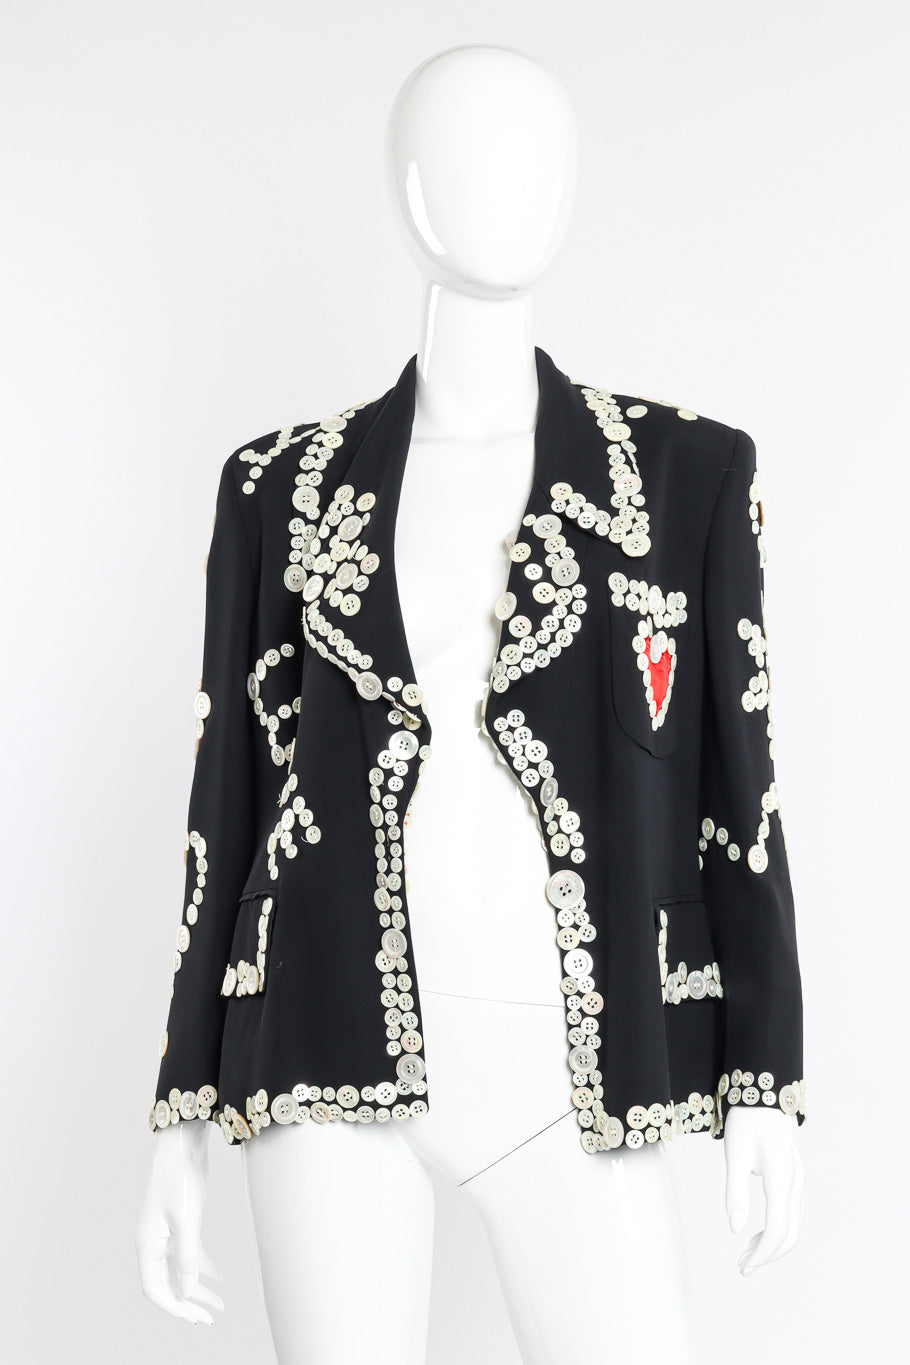 Vintage Moschino Mother of Pearl Button Blazer front view unfastened on mannequin @Recessla